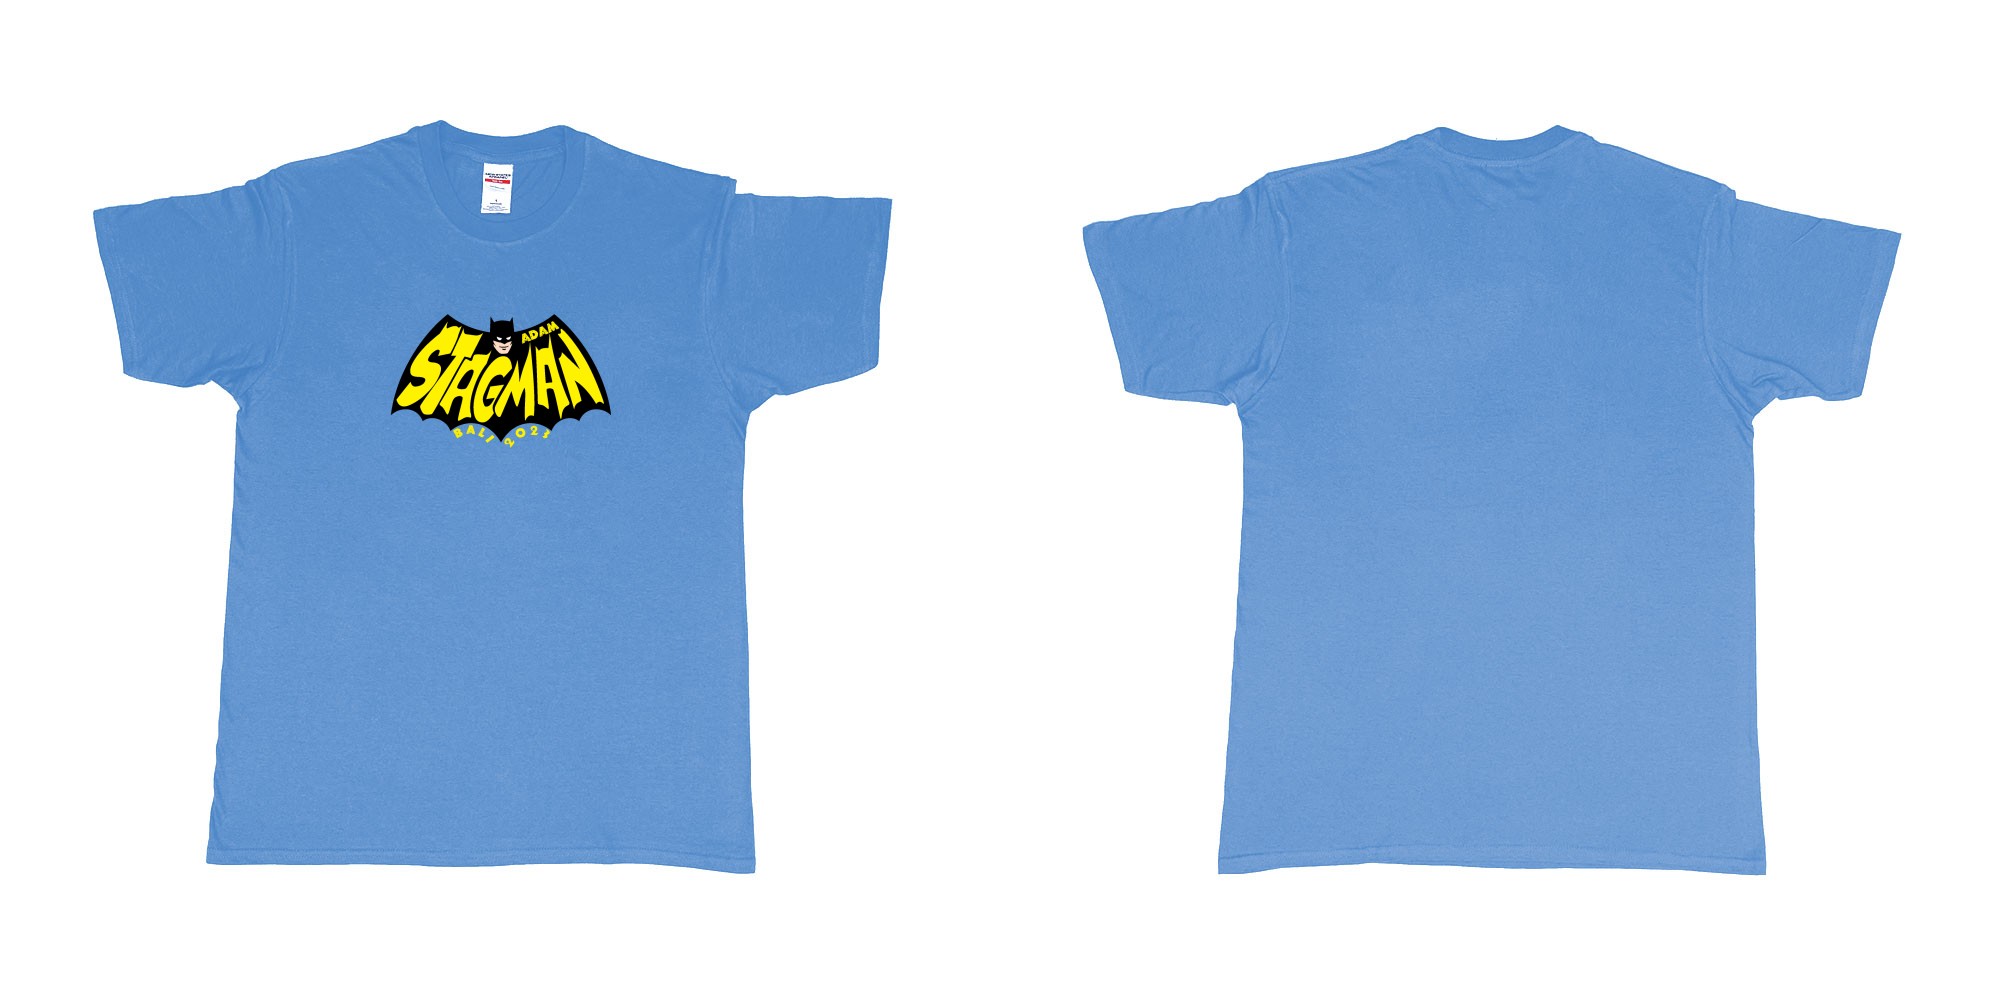 Custom tshirt design Batman StagMan Old School in fabric color carolina-blue choice your own text made in Bali by The Pirate Way